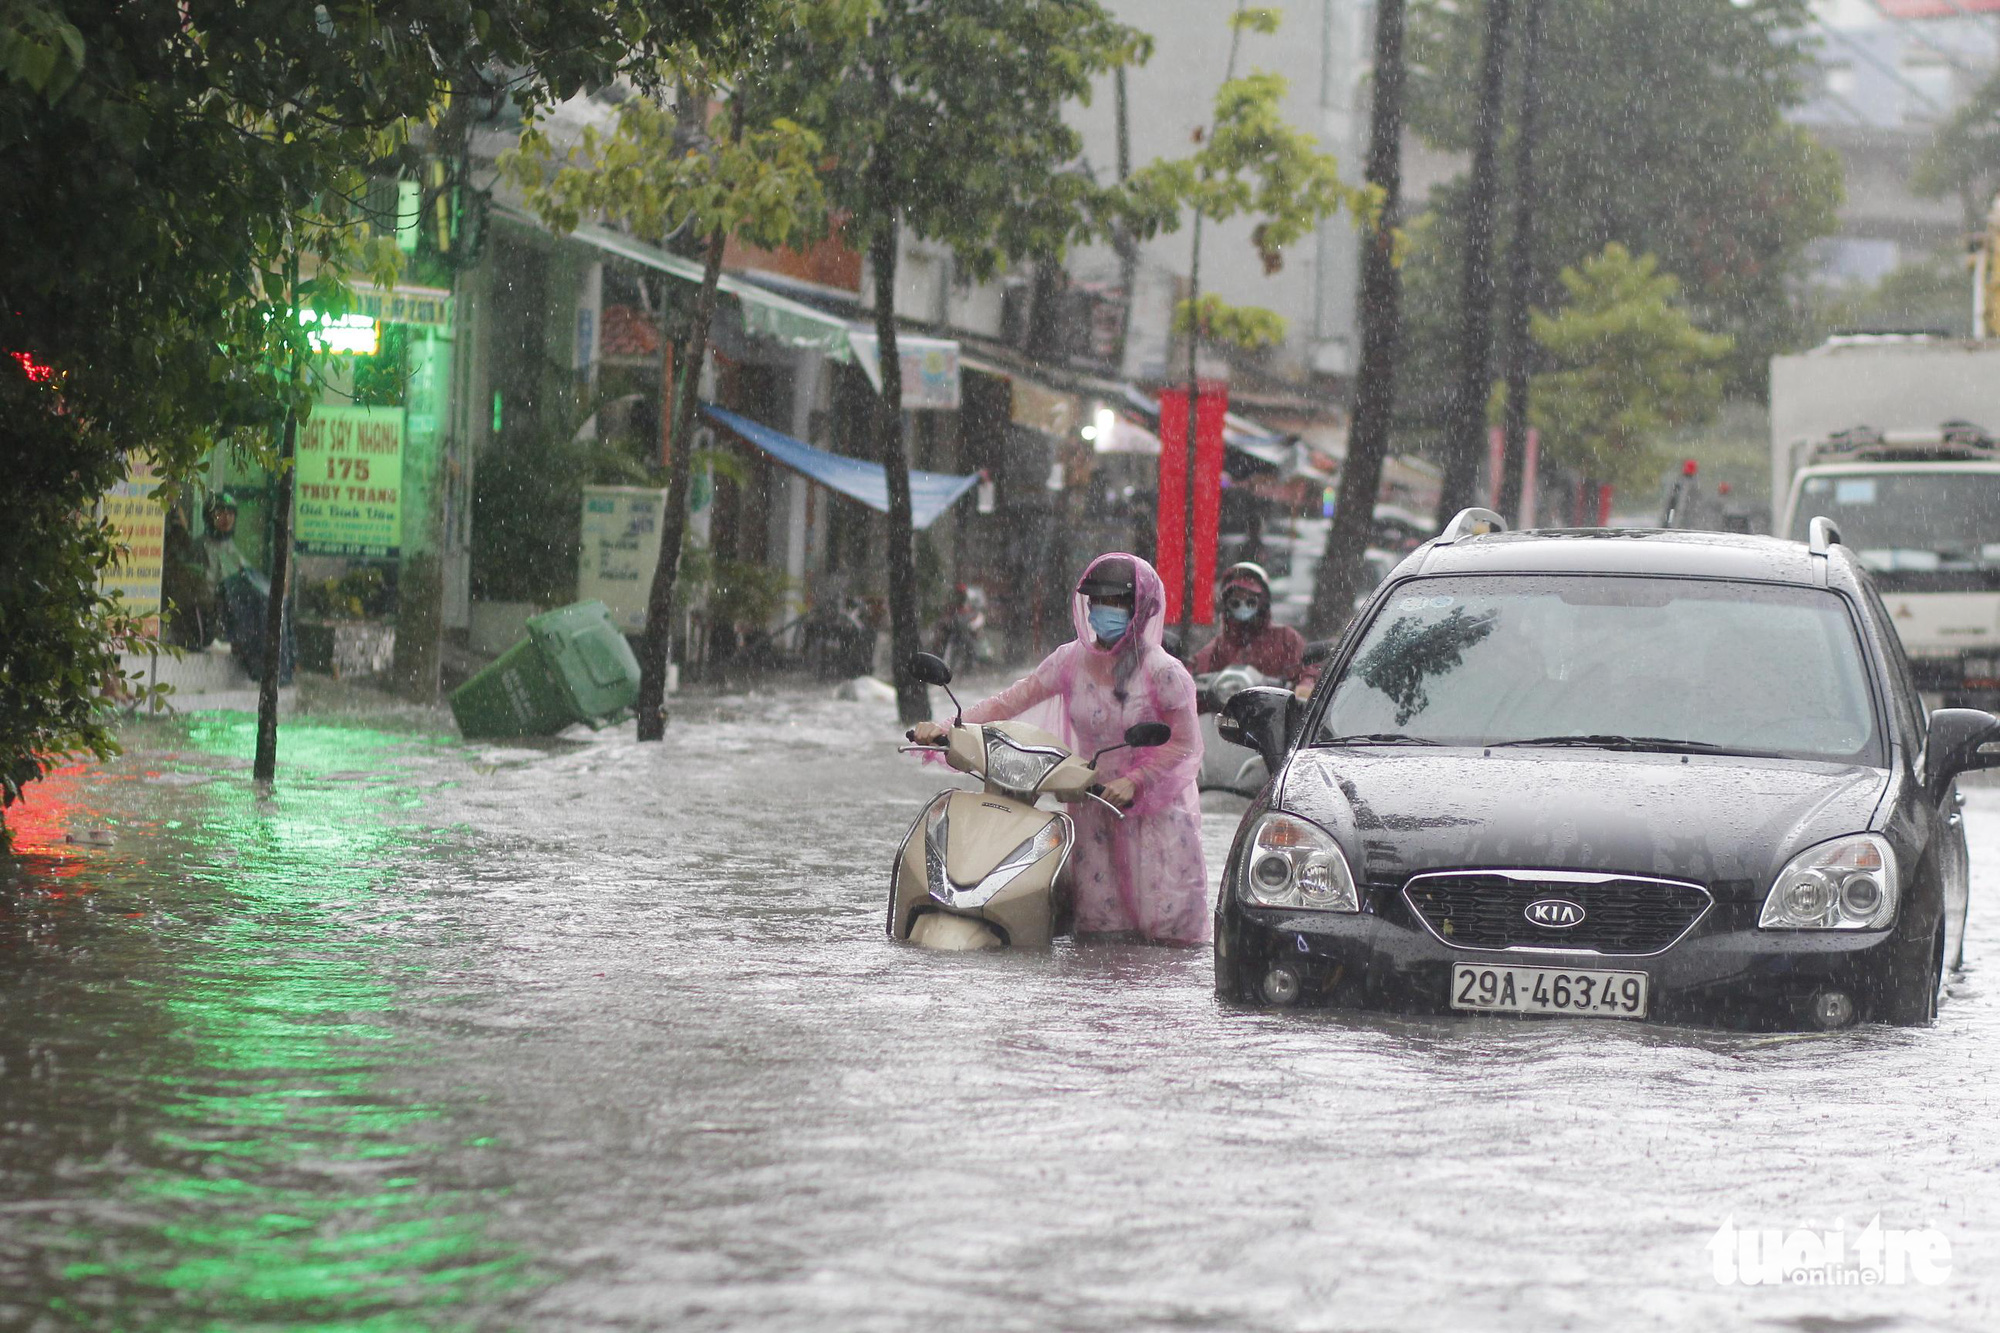 Commuters have a hard time traveling on a flooded street in Ho Chi Minh City, June 16, 2020. Photo: Chau Tuan / Tuoi Tre